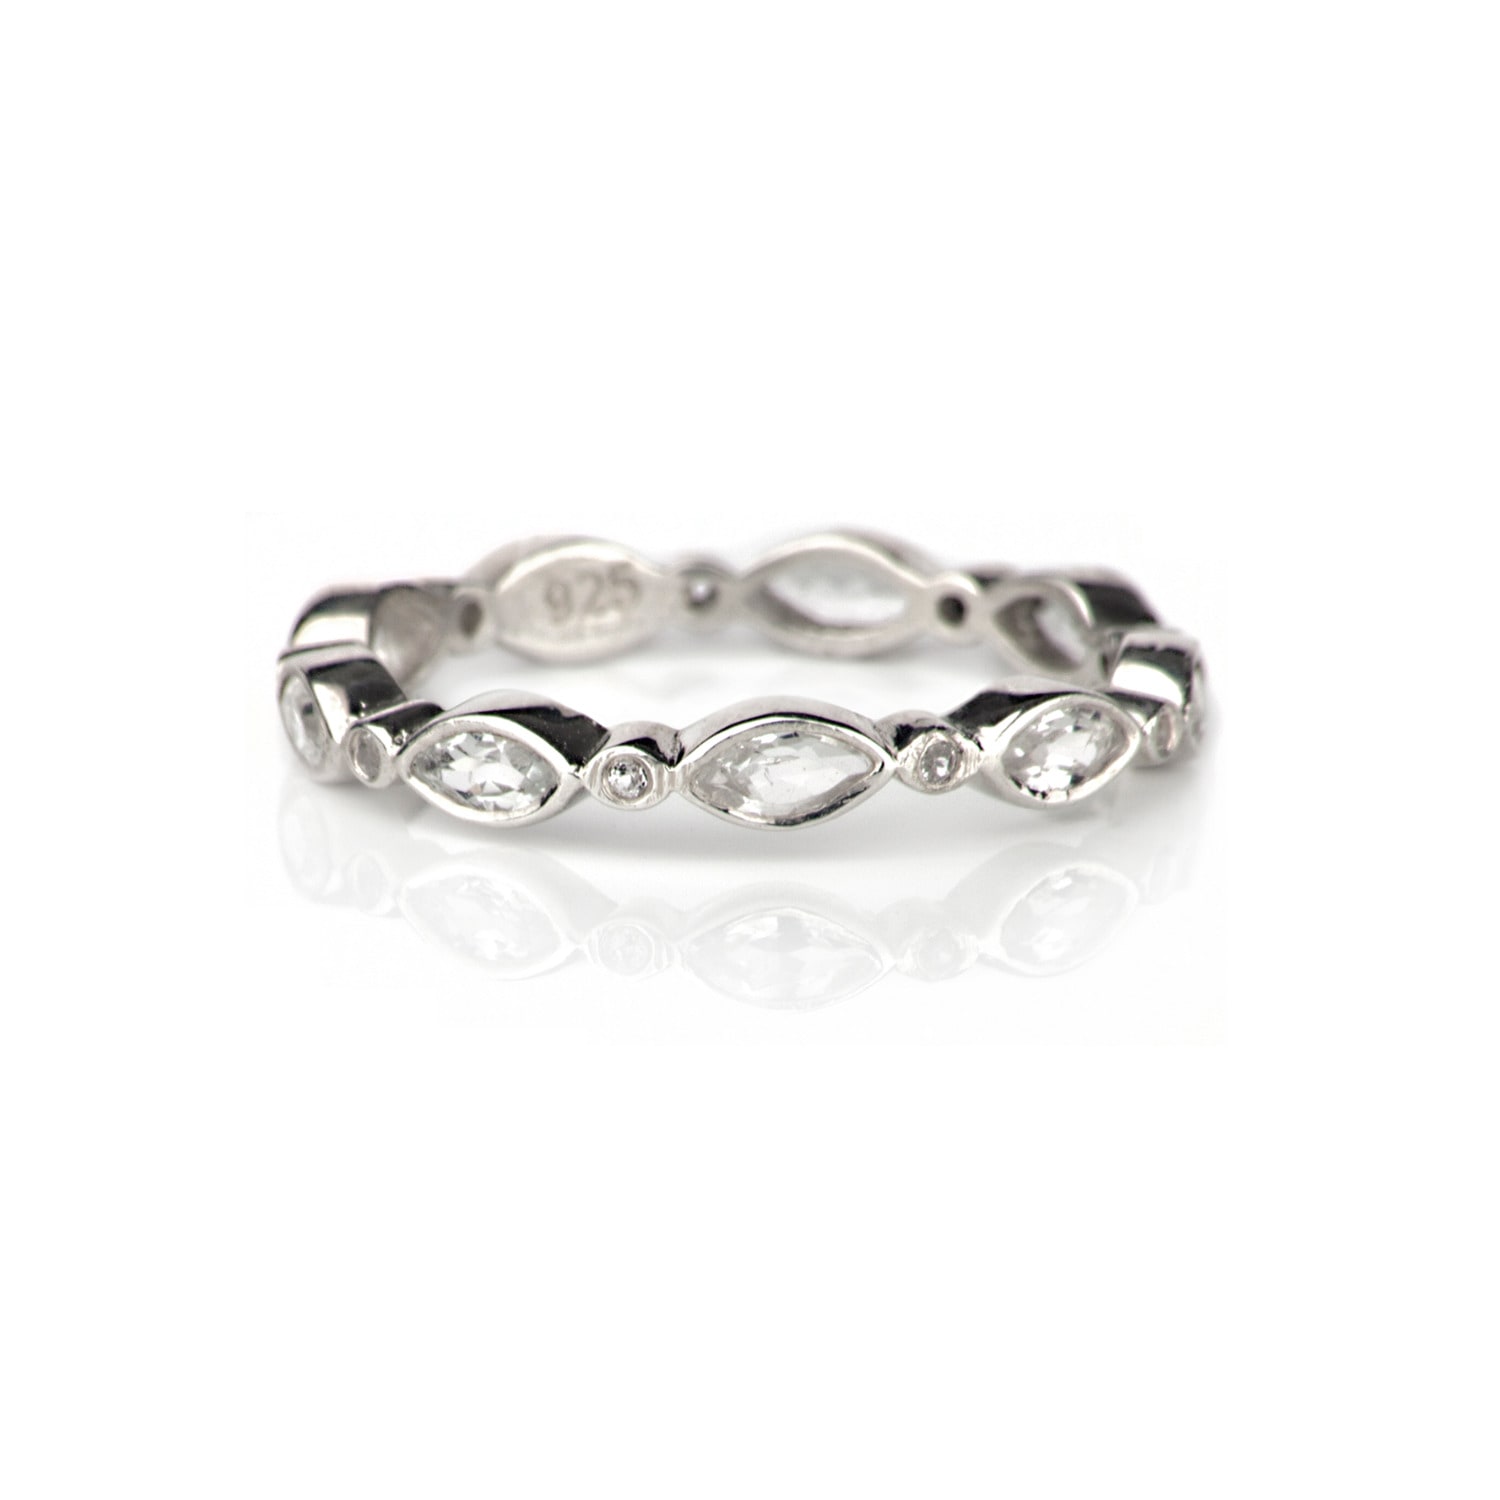 Women’s Silver / White Eternity Band With White Topaz In Sterling Silver The Jewellery Store London